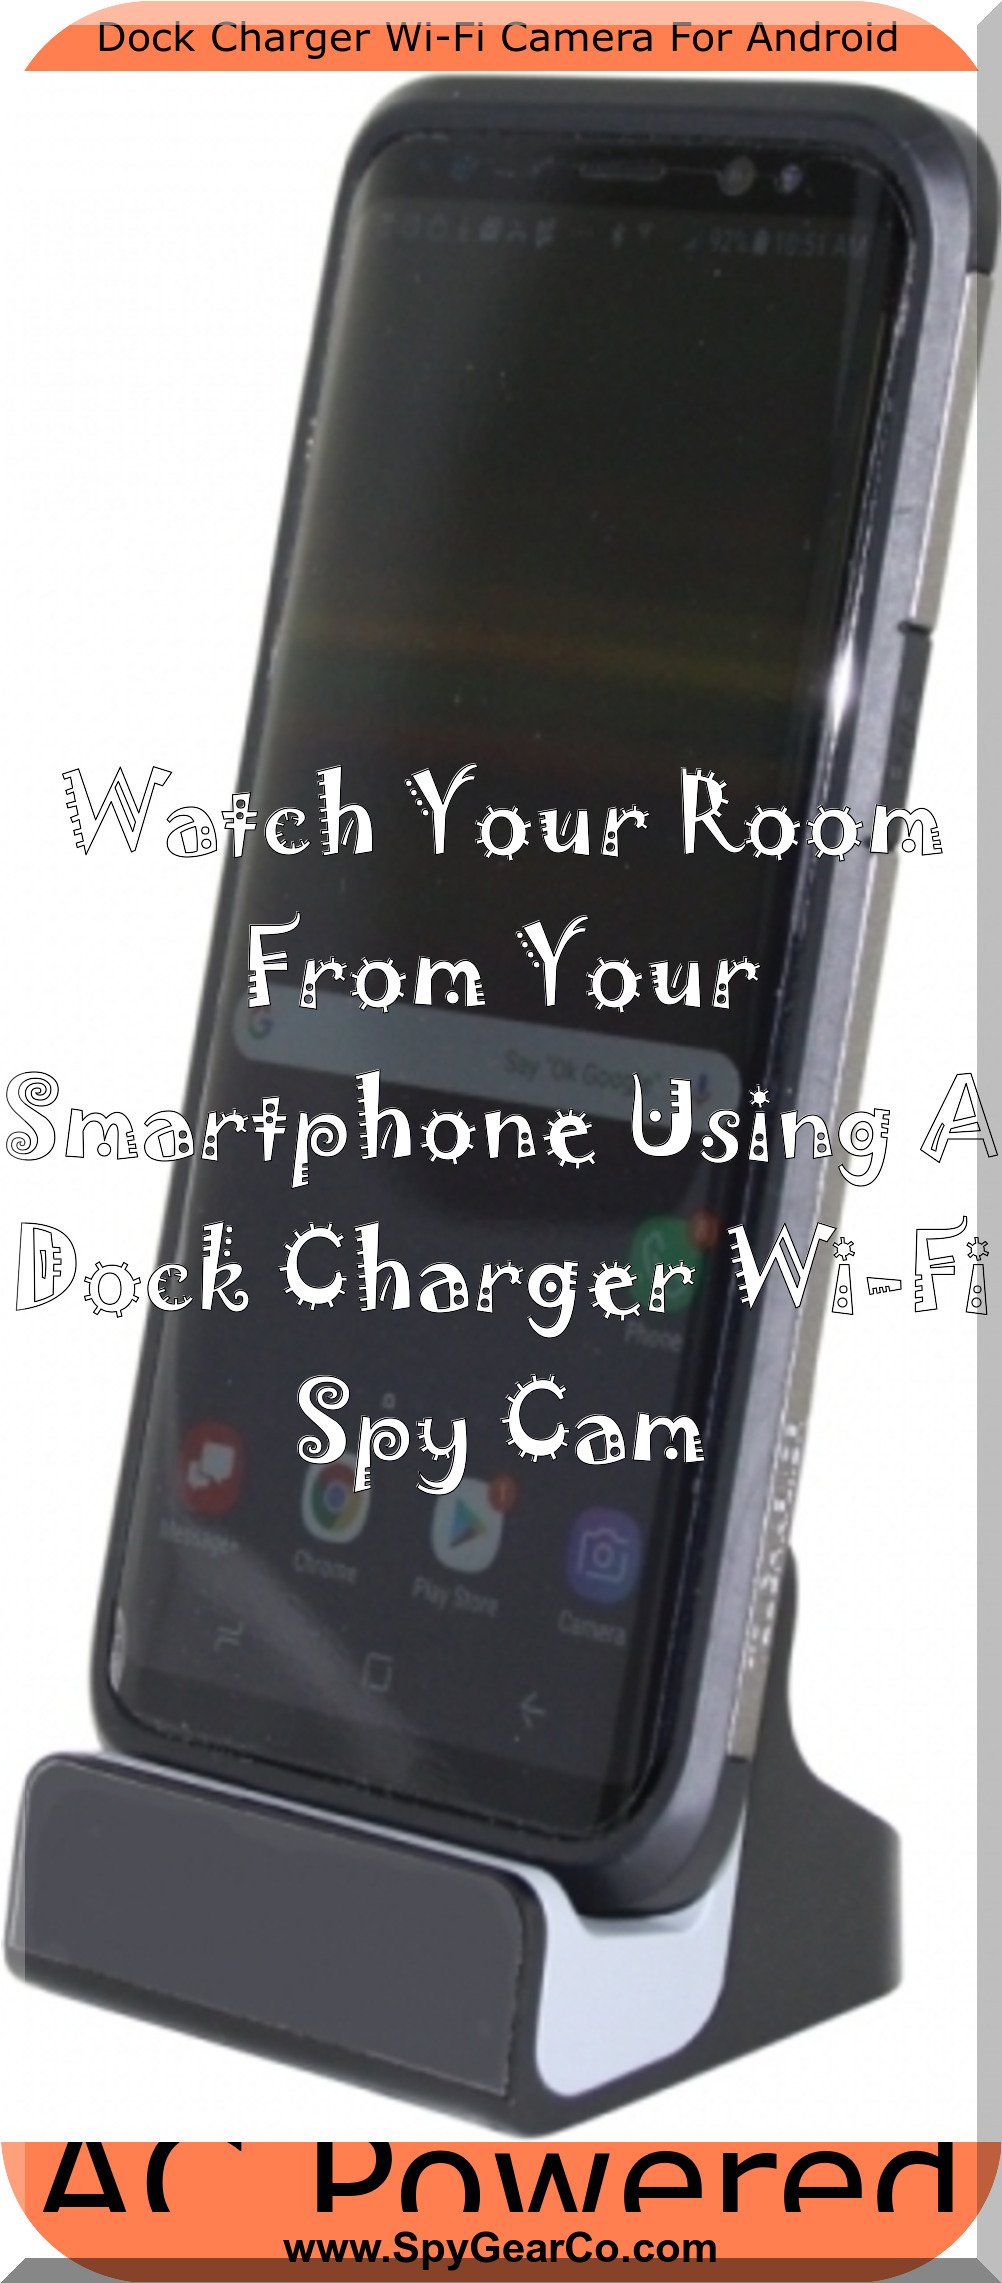 Dock Charger Wi-Fi Camera For Android